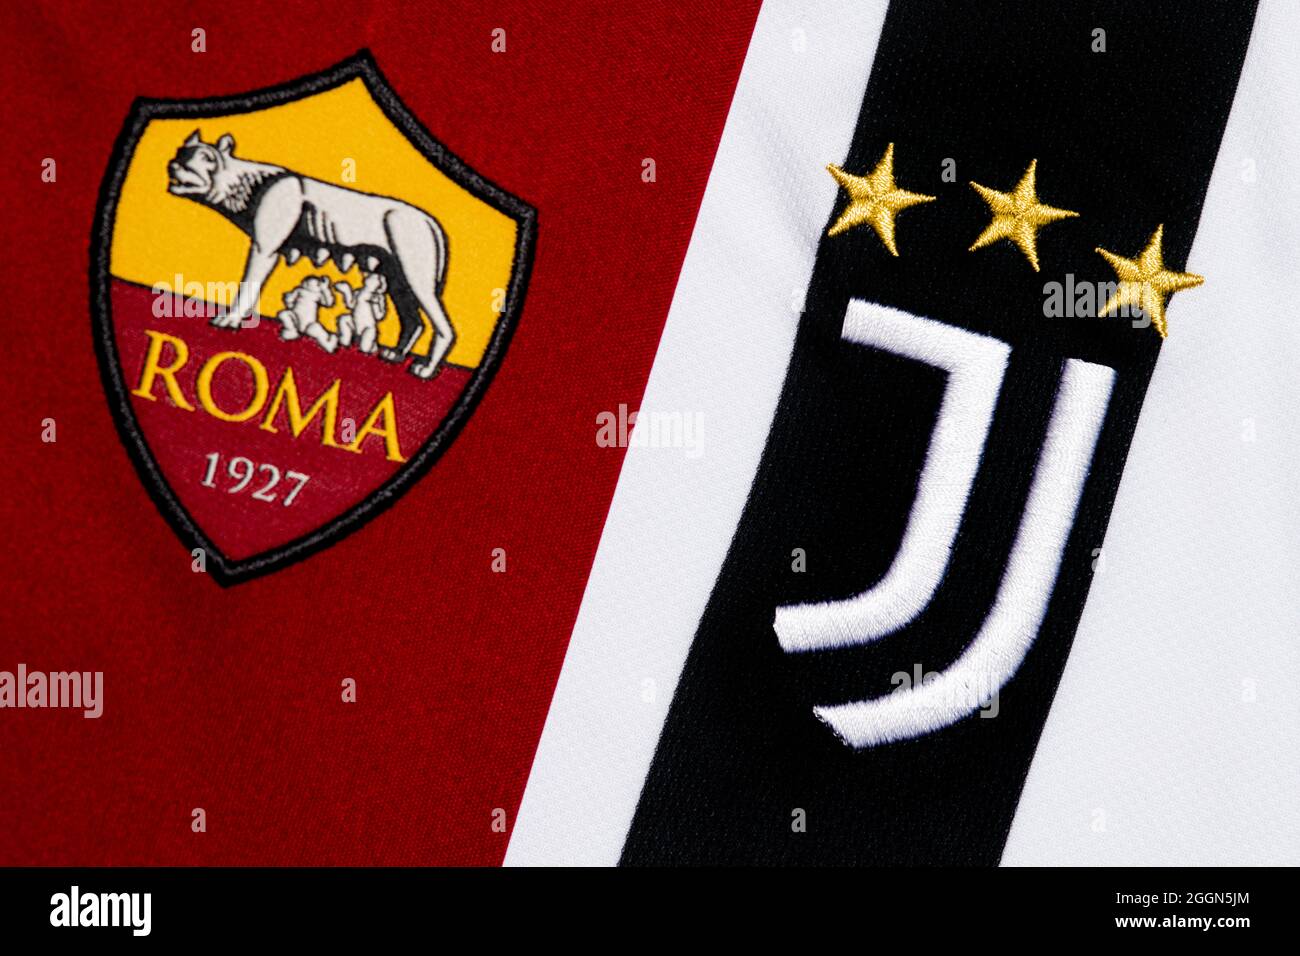 Juve roma hi-res stock photography and images - Alamy